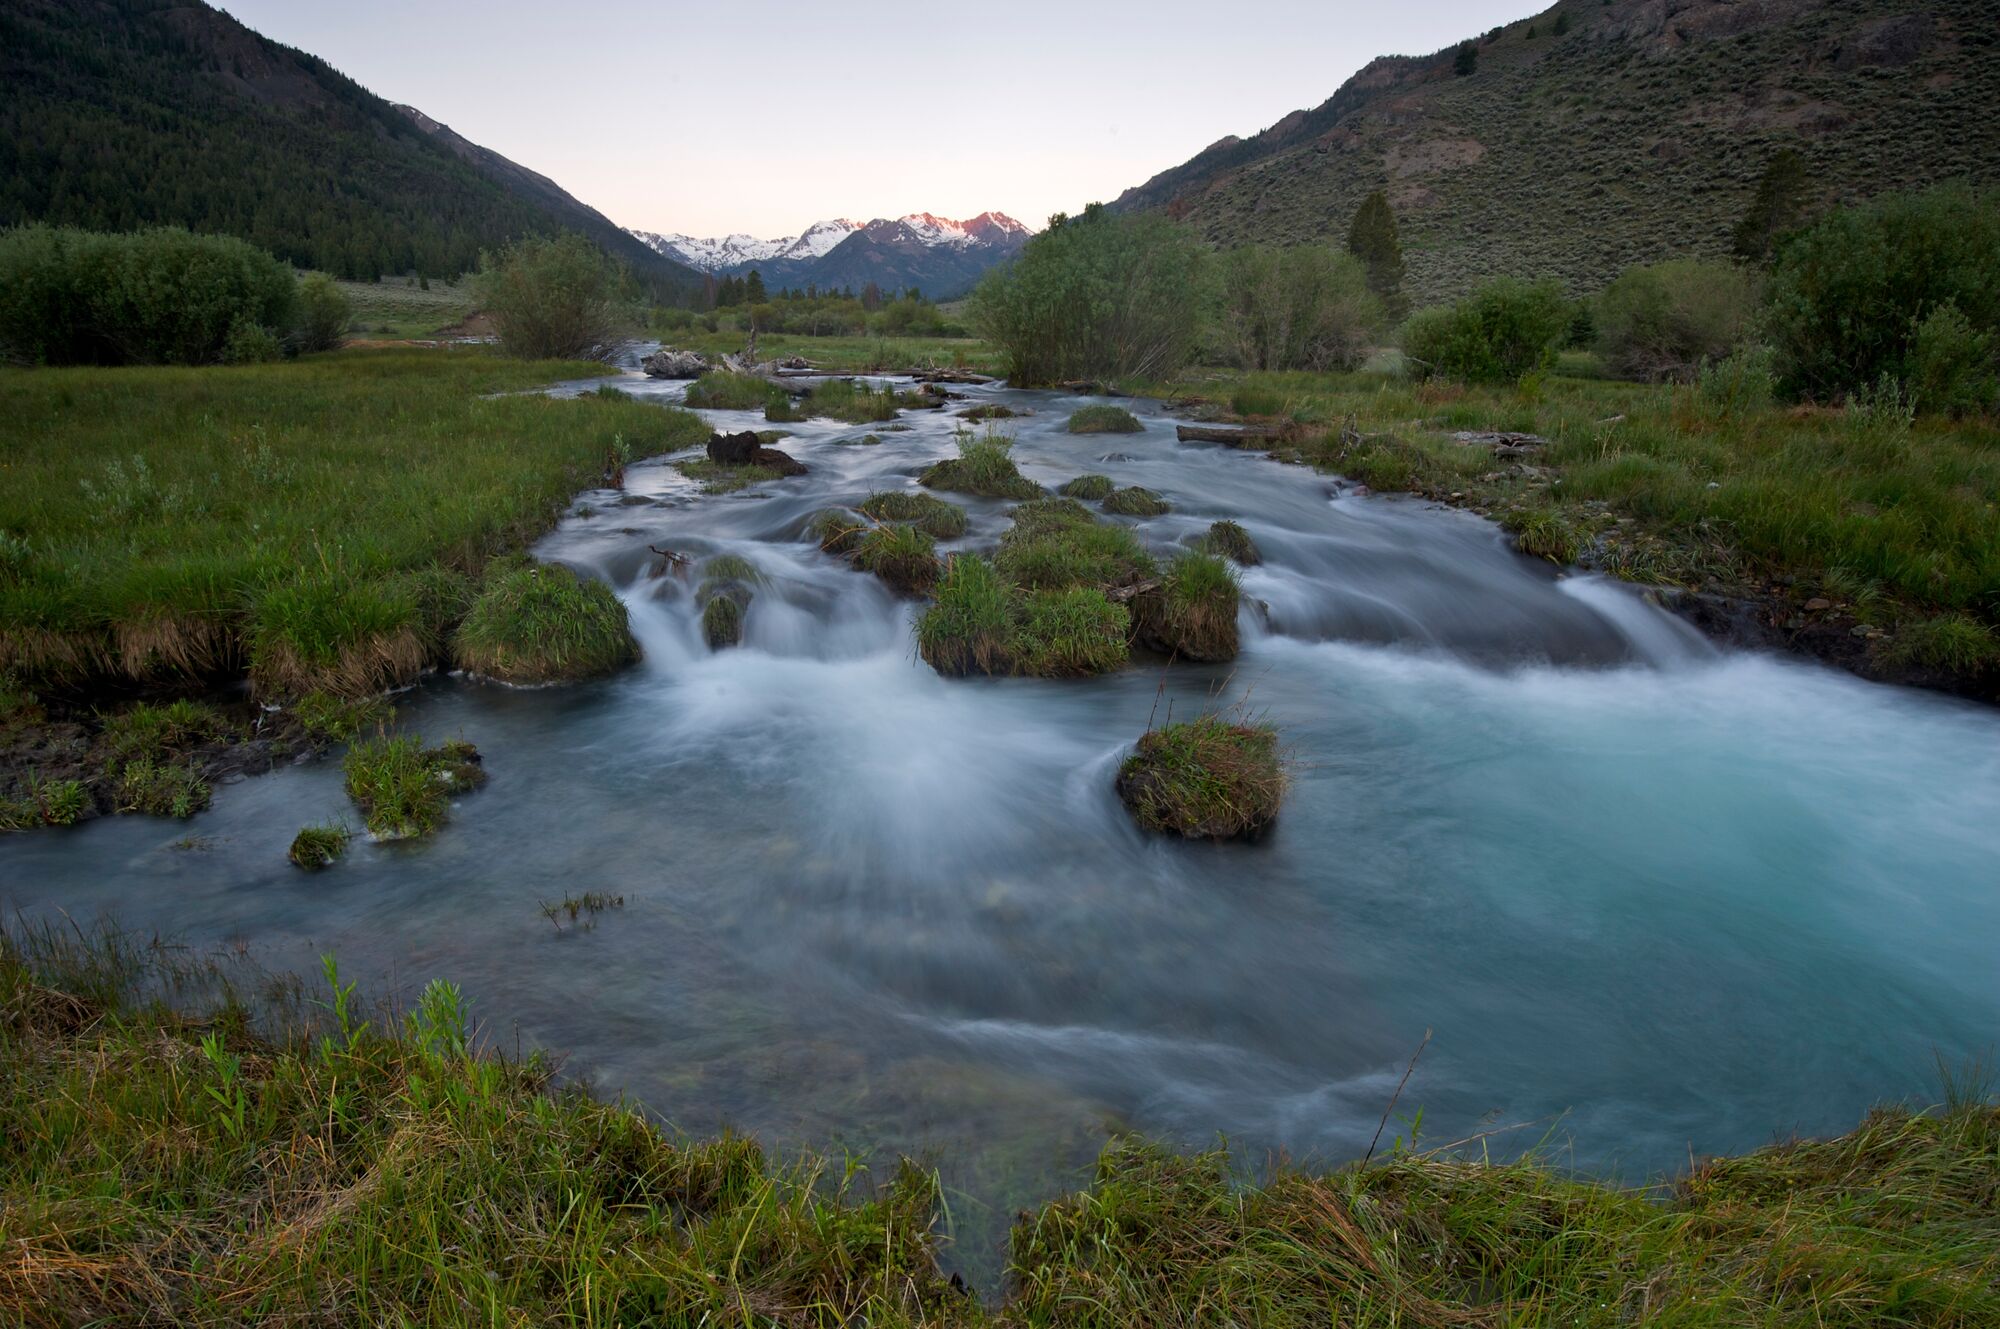 East fork of the Salmon River, one of the major tributaries of the Snake River.